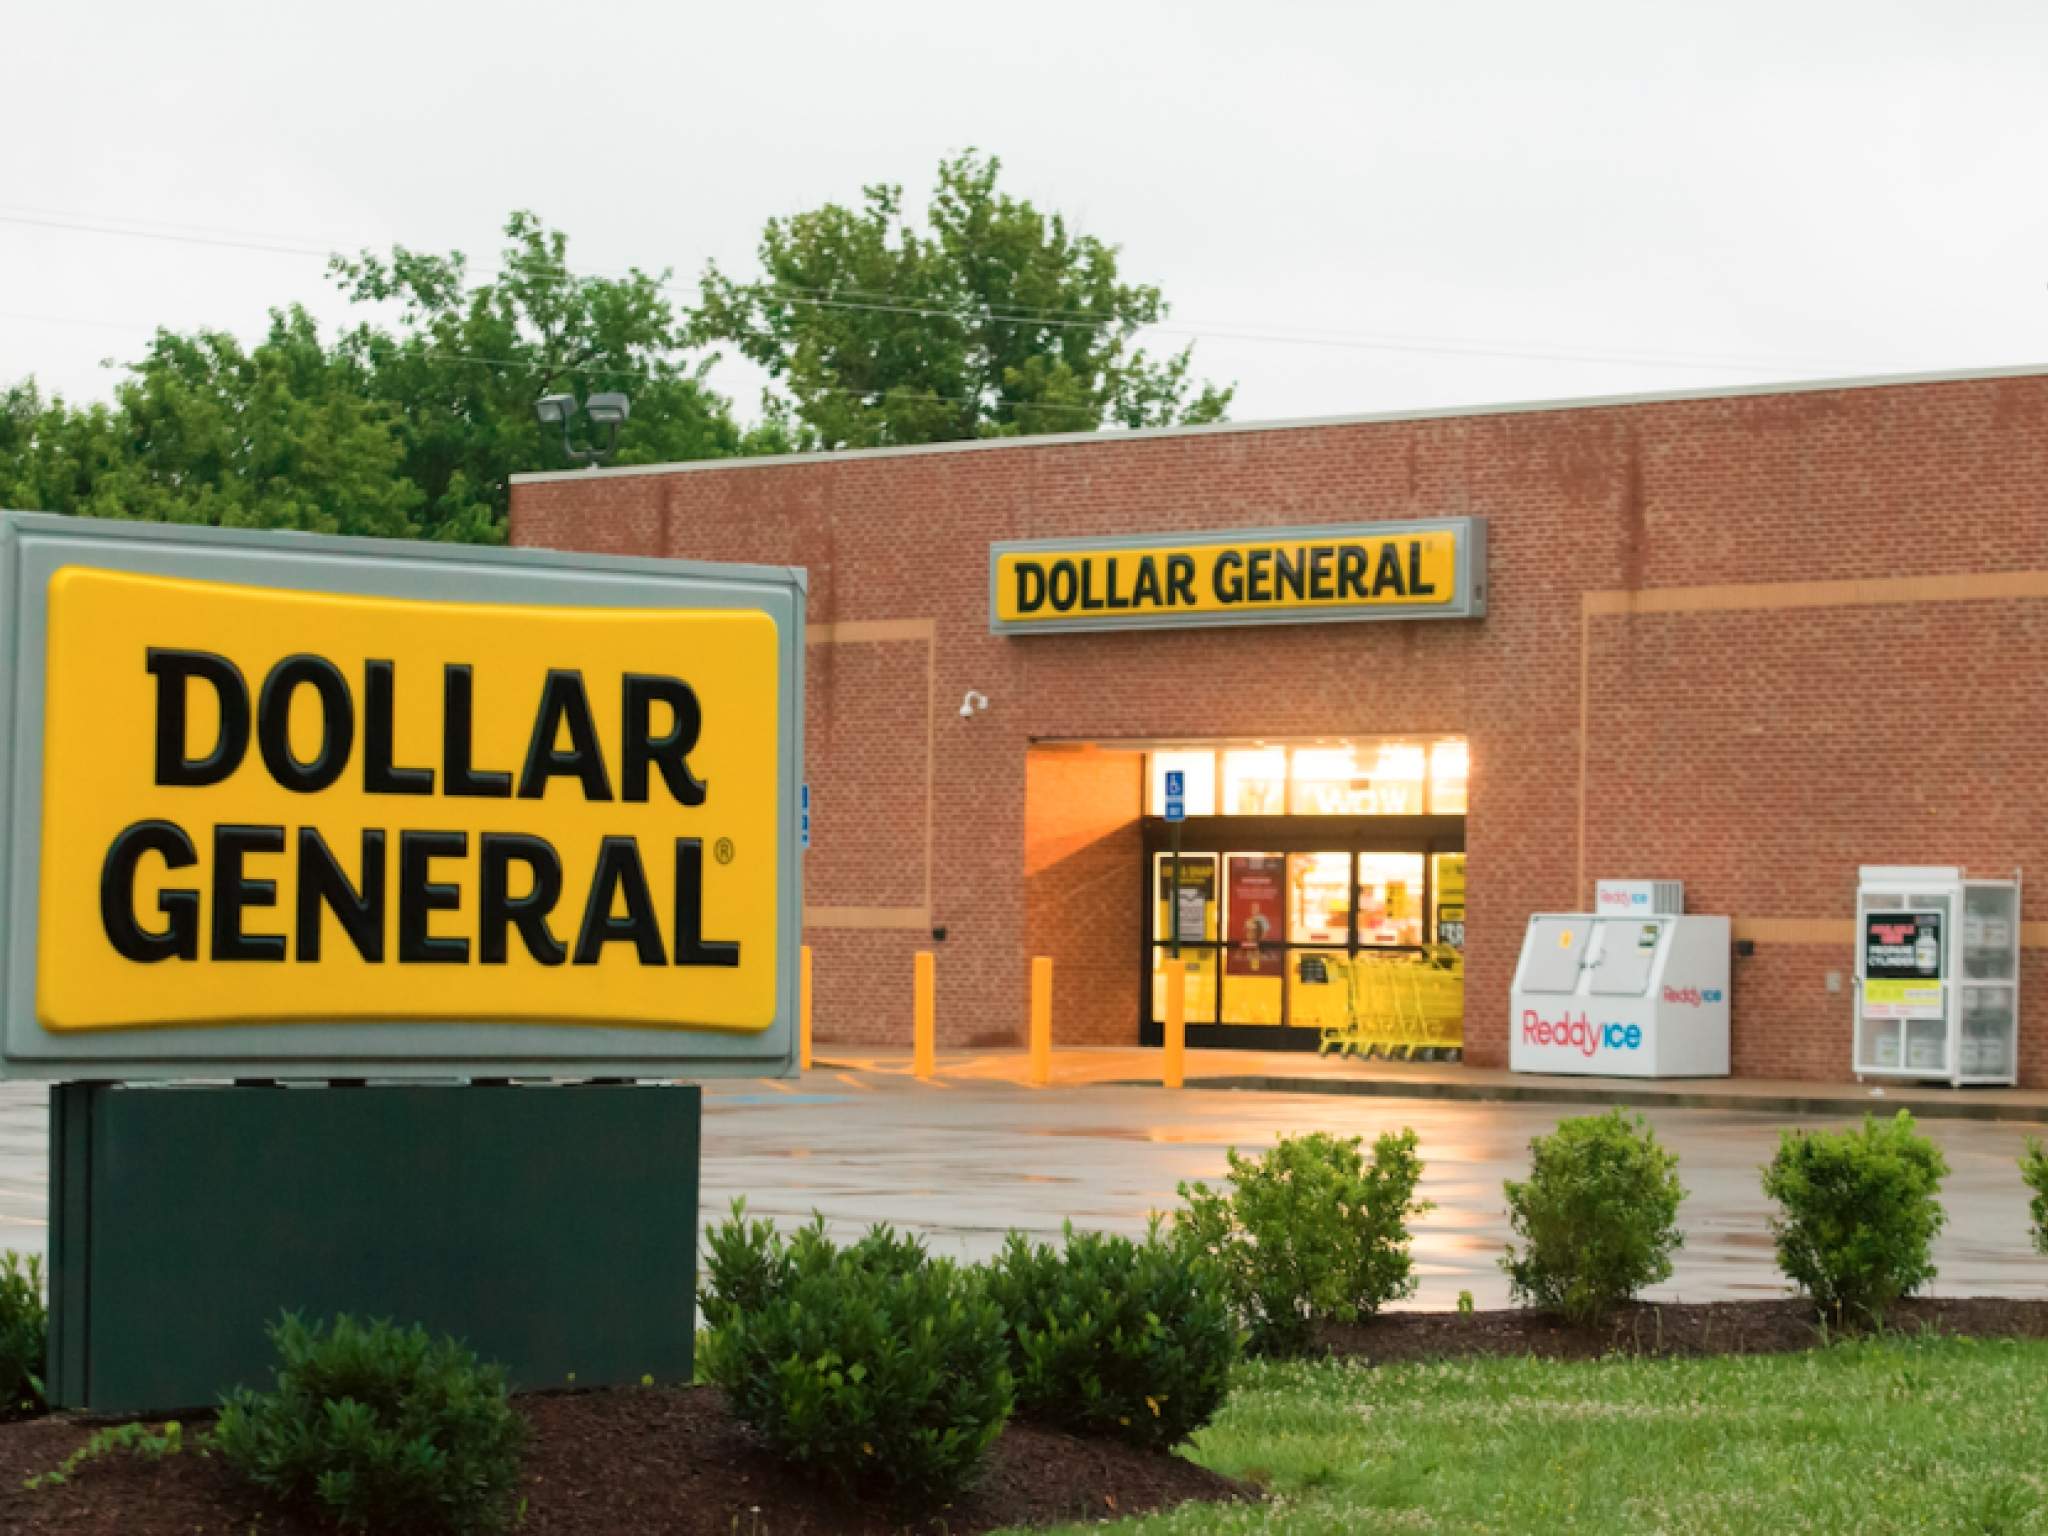  dollar-general-salesforce-and-3-stocks-to-watch-heading-into-thursday 